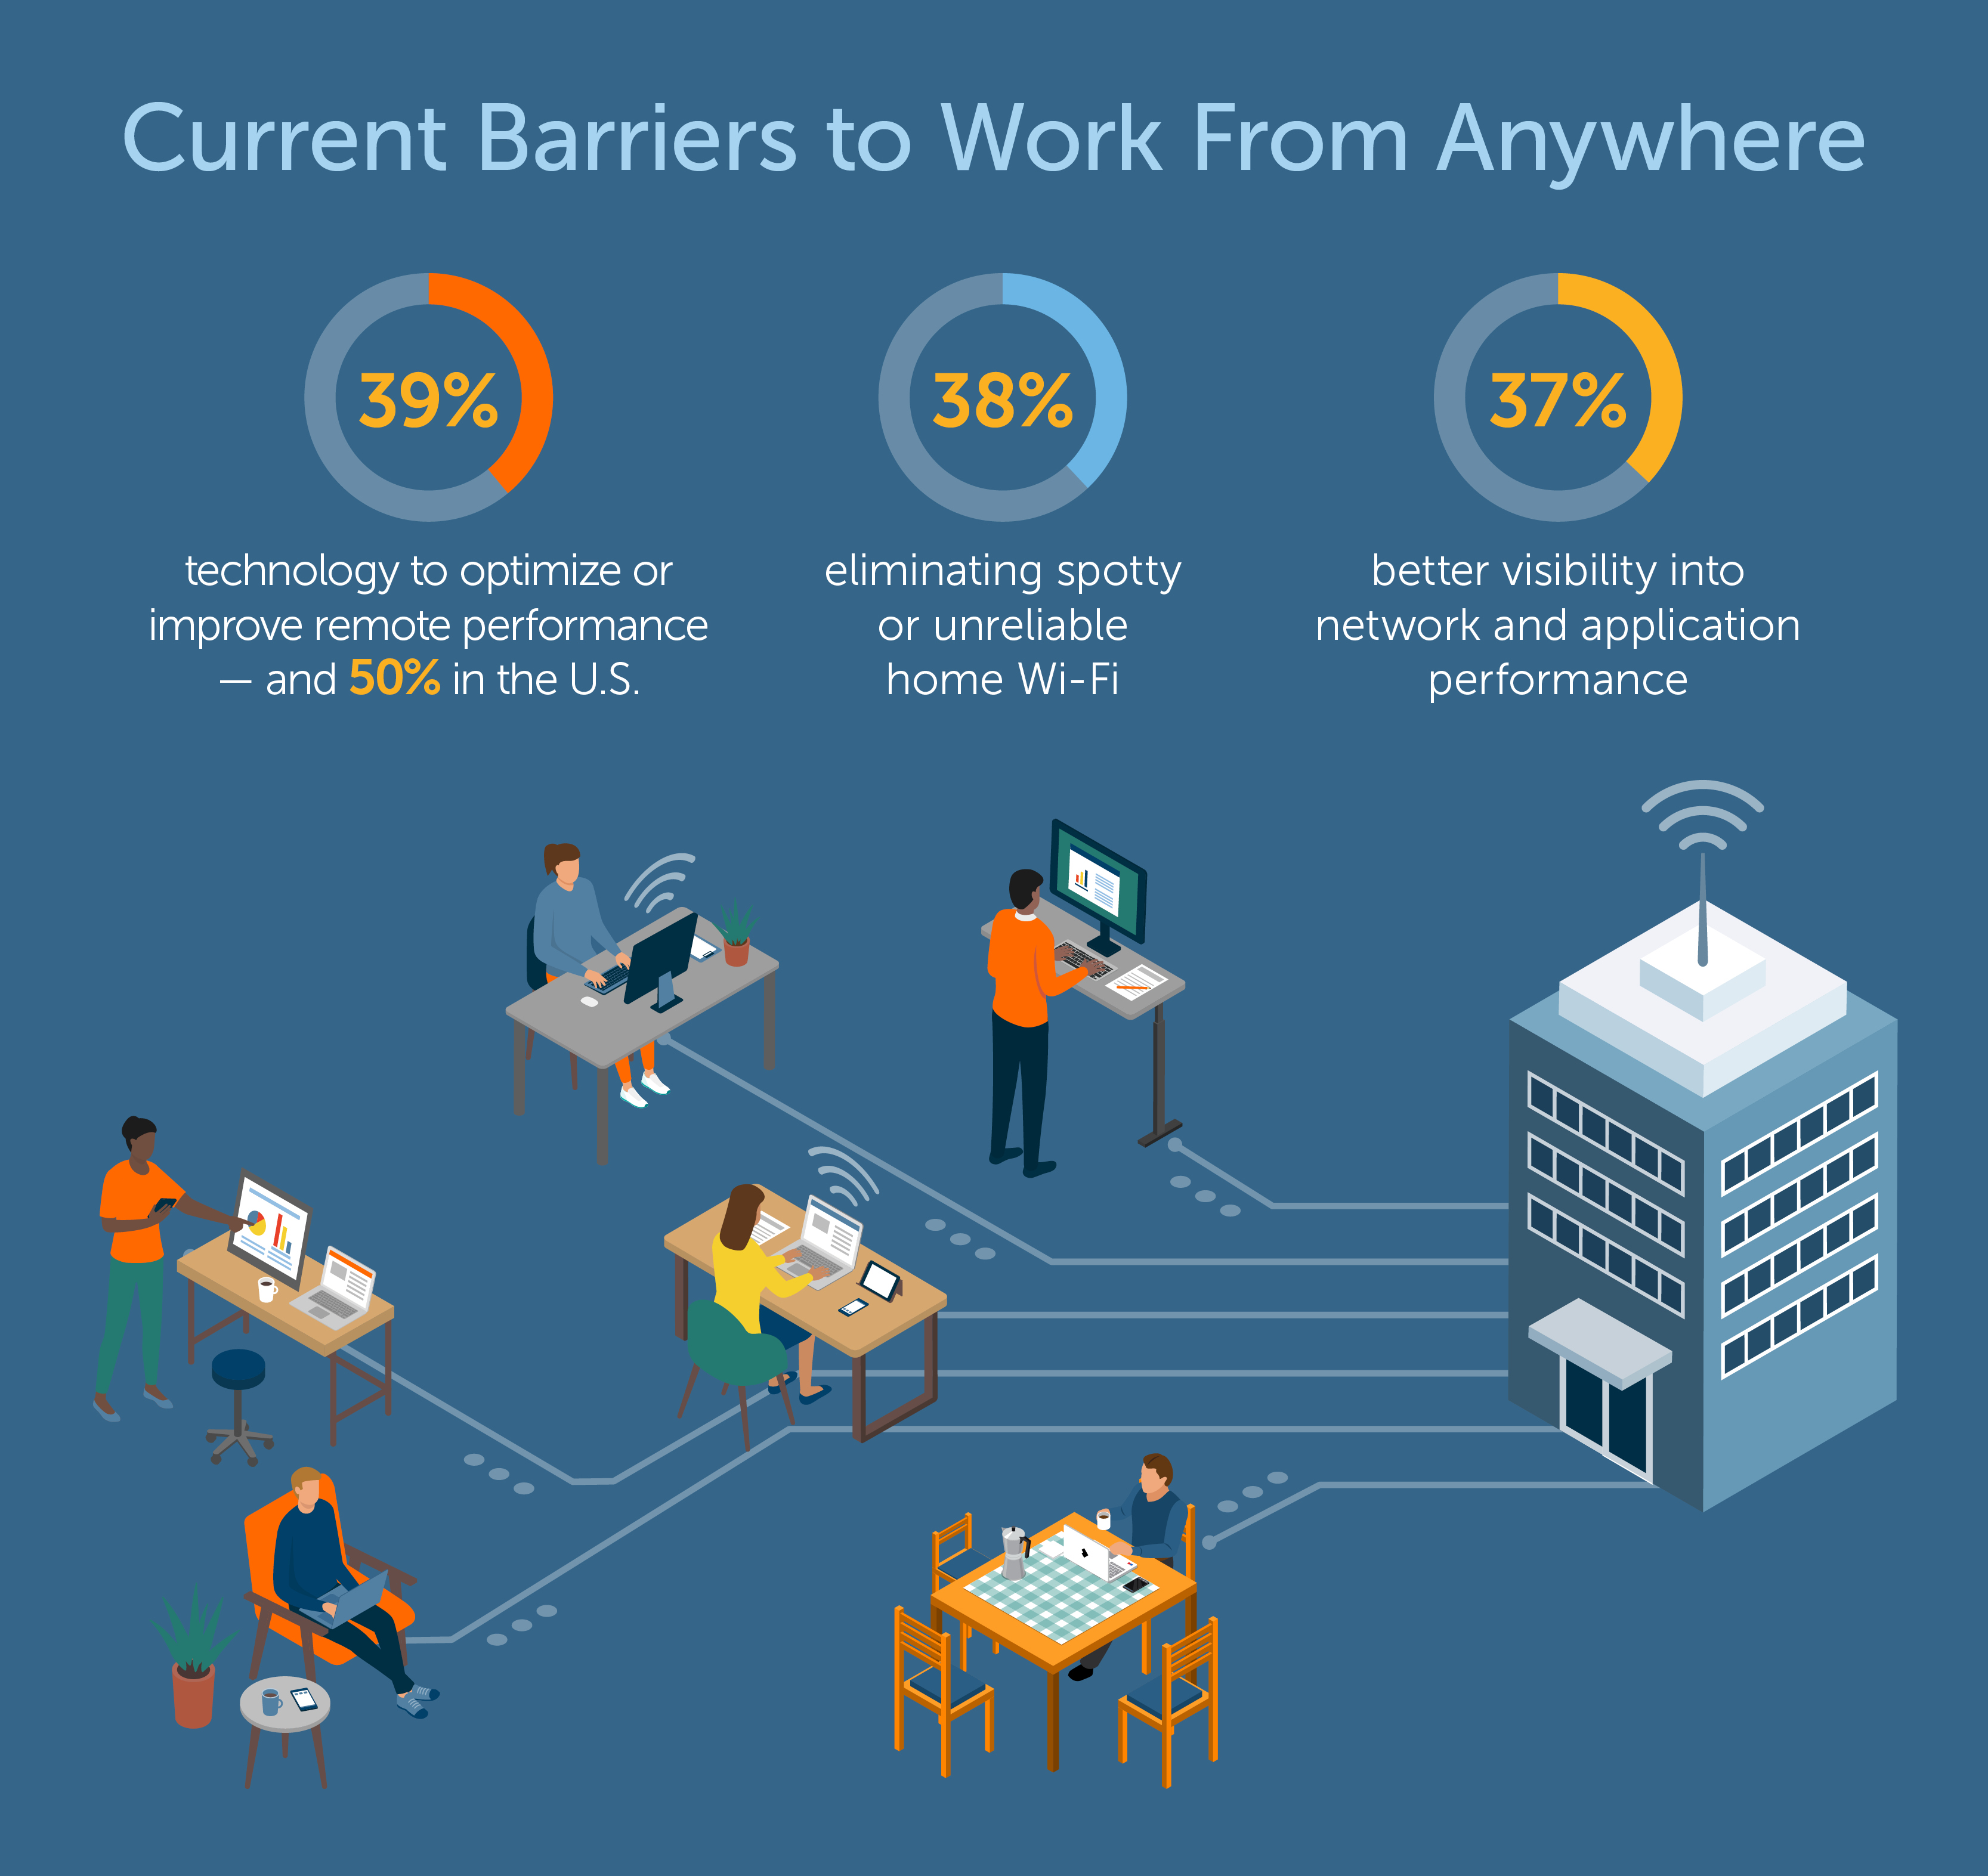 Riverbed Future of Work Global Survey 2020 reveals current barriers to remote workforce performance